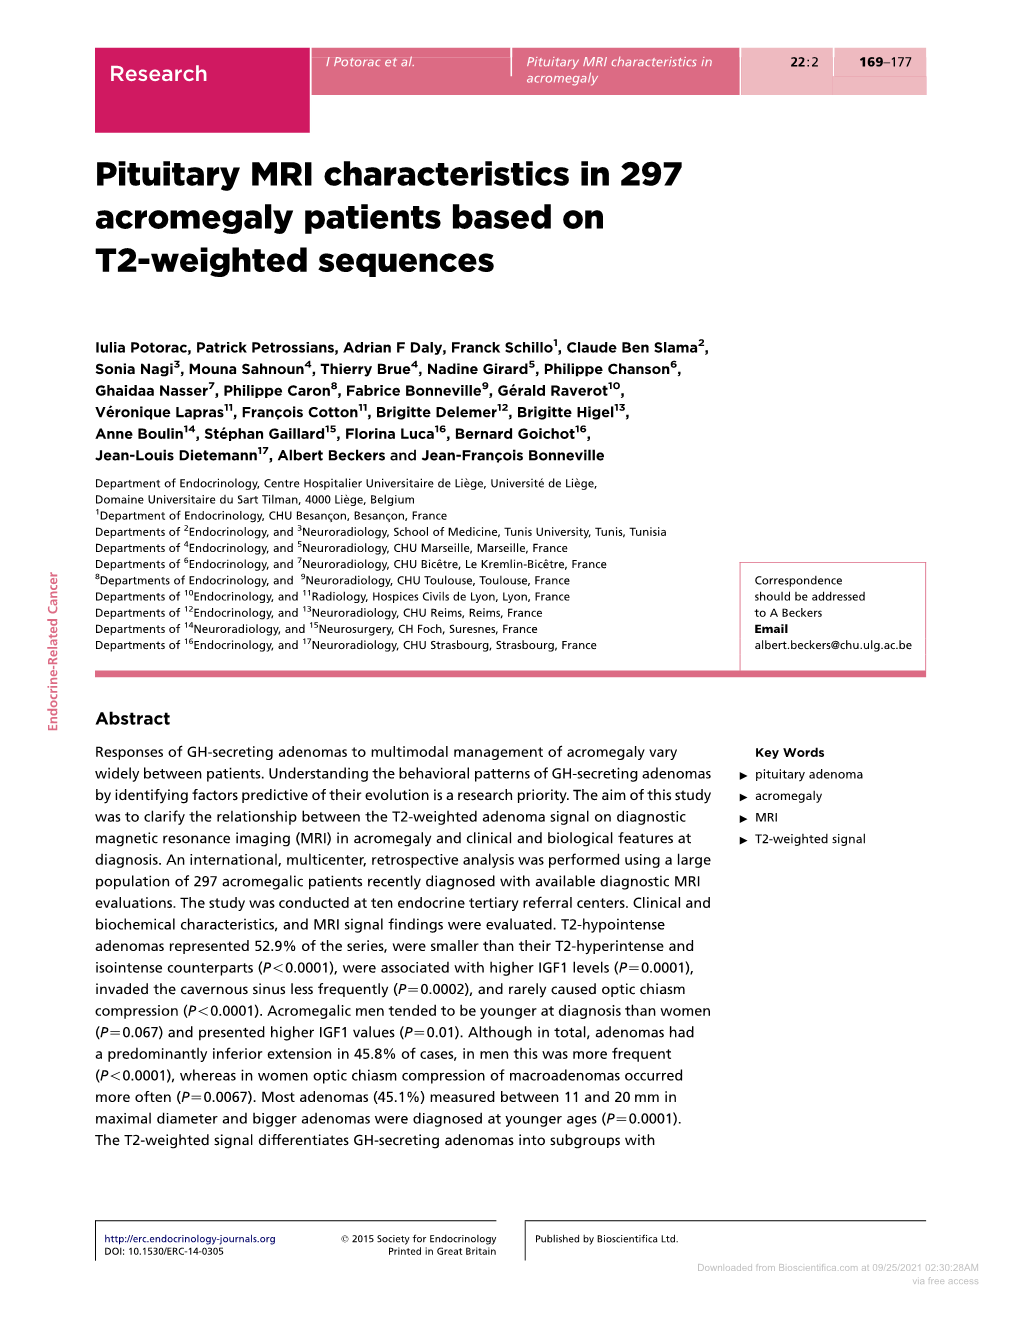 Pituitary MRI Characteristics in 297 Acromegaly Patients Based on T2-Weighted Sequences